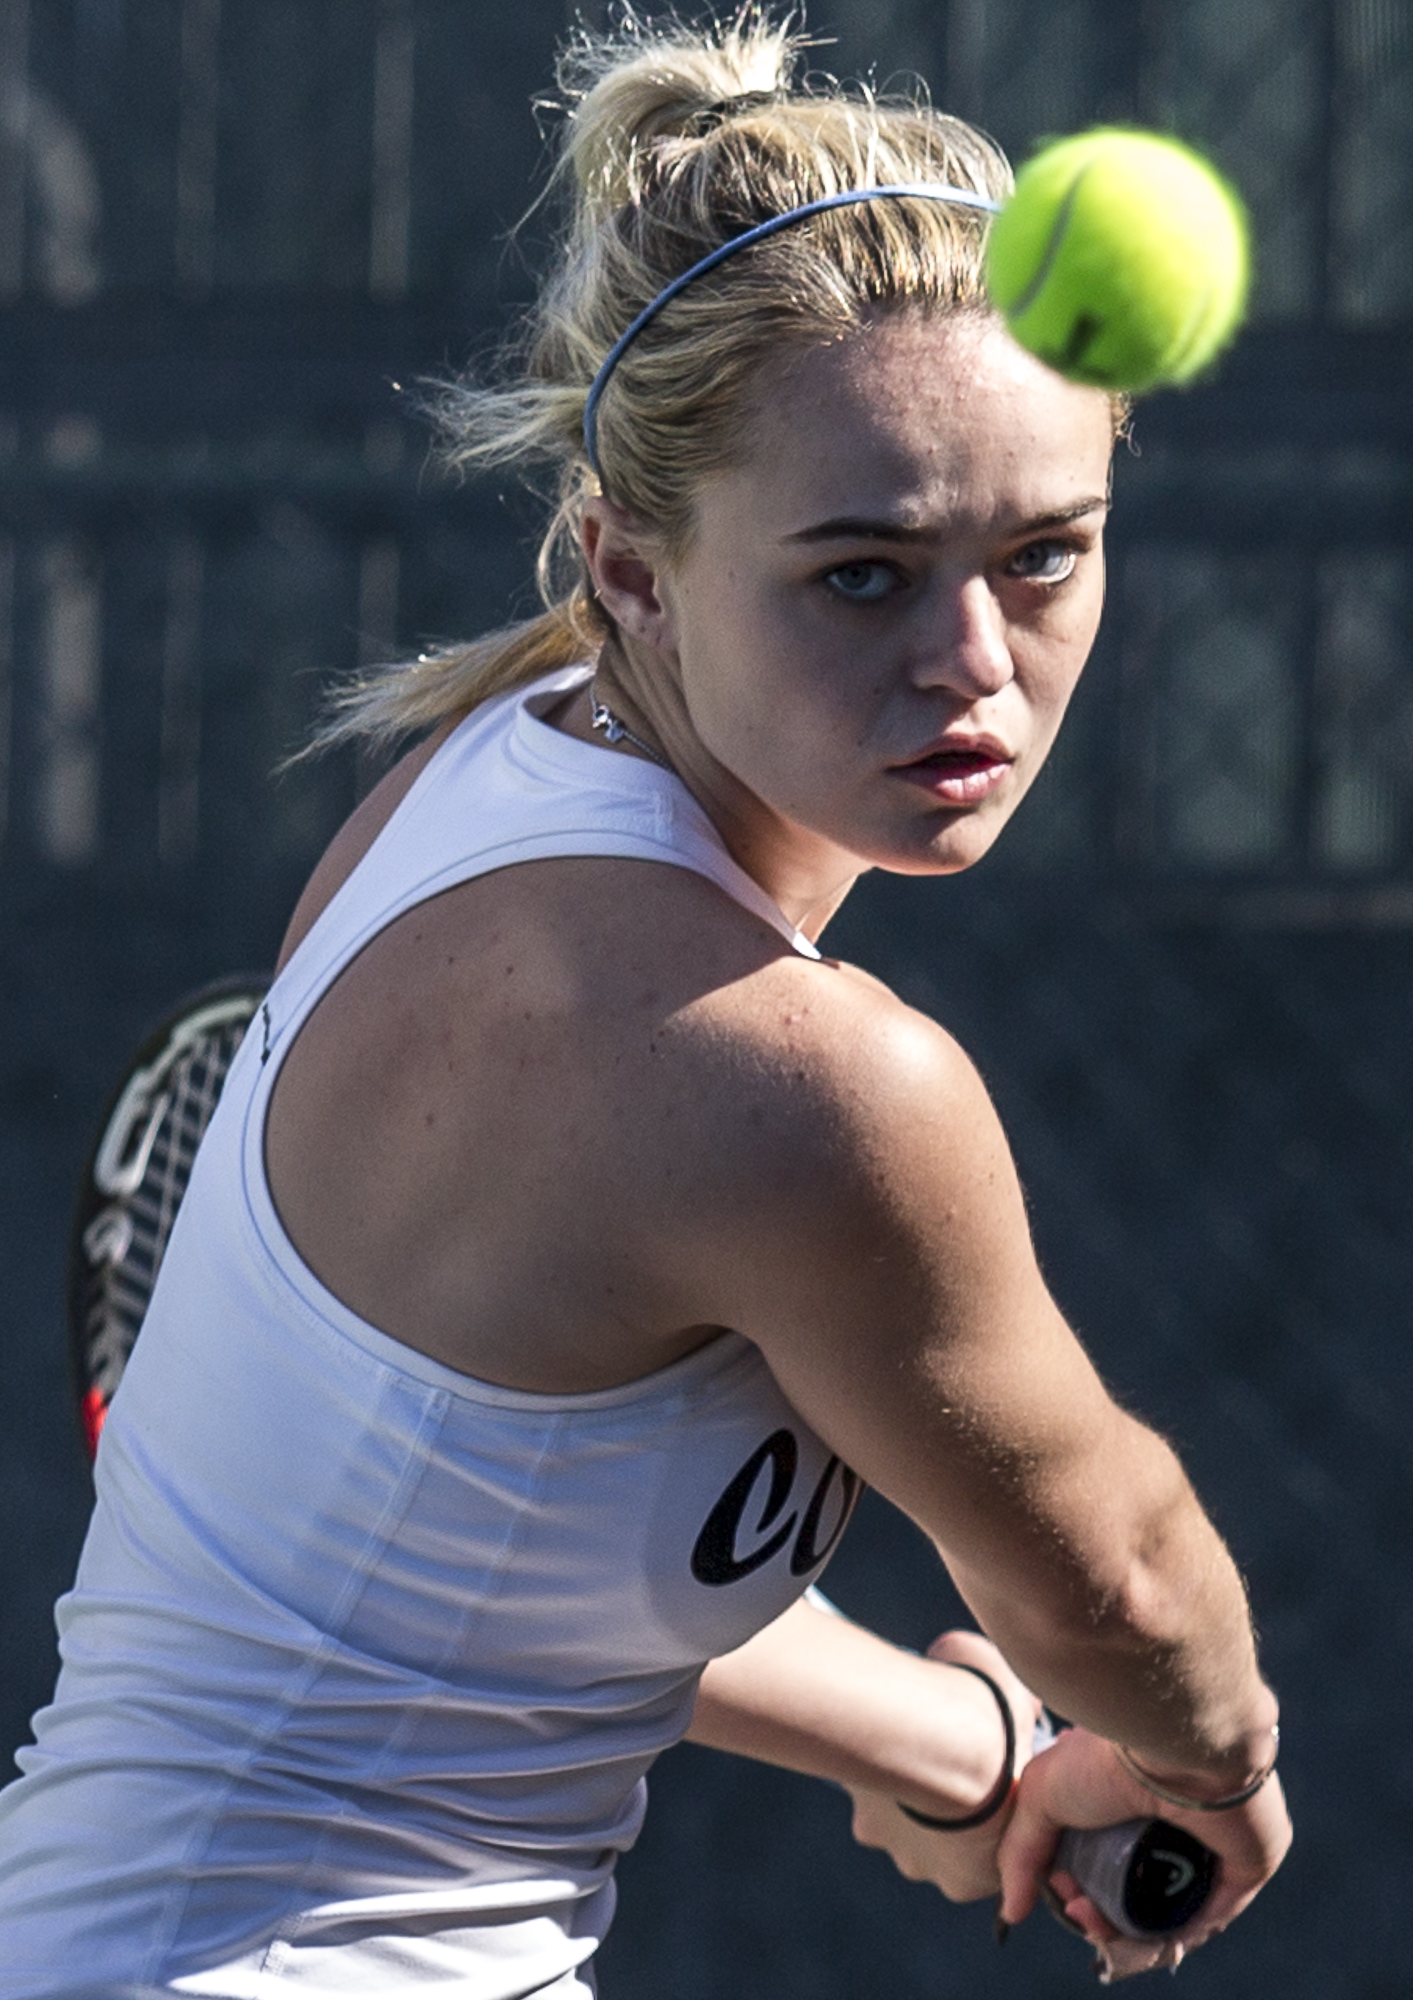  Santa Monica College Corsair sophomore Abby Mullins (#1, singles) prepares to hit a powerful, backhand slice against her Victor Valley College opponent Ally Samp at the Ocean View Park Tennis Courts in Santa Monica, California on Tuesday, March 27 2